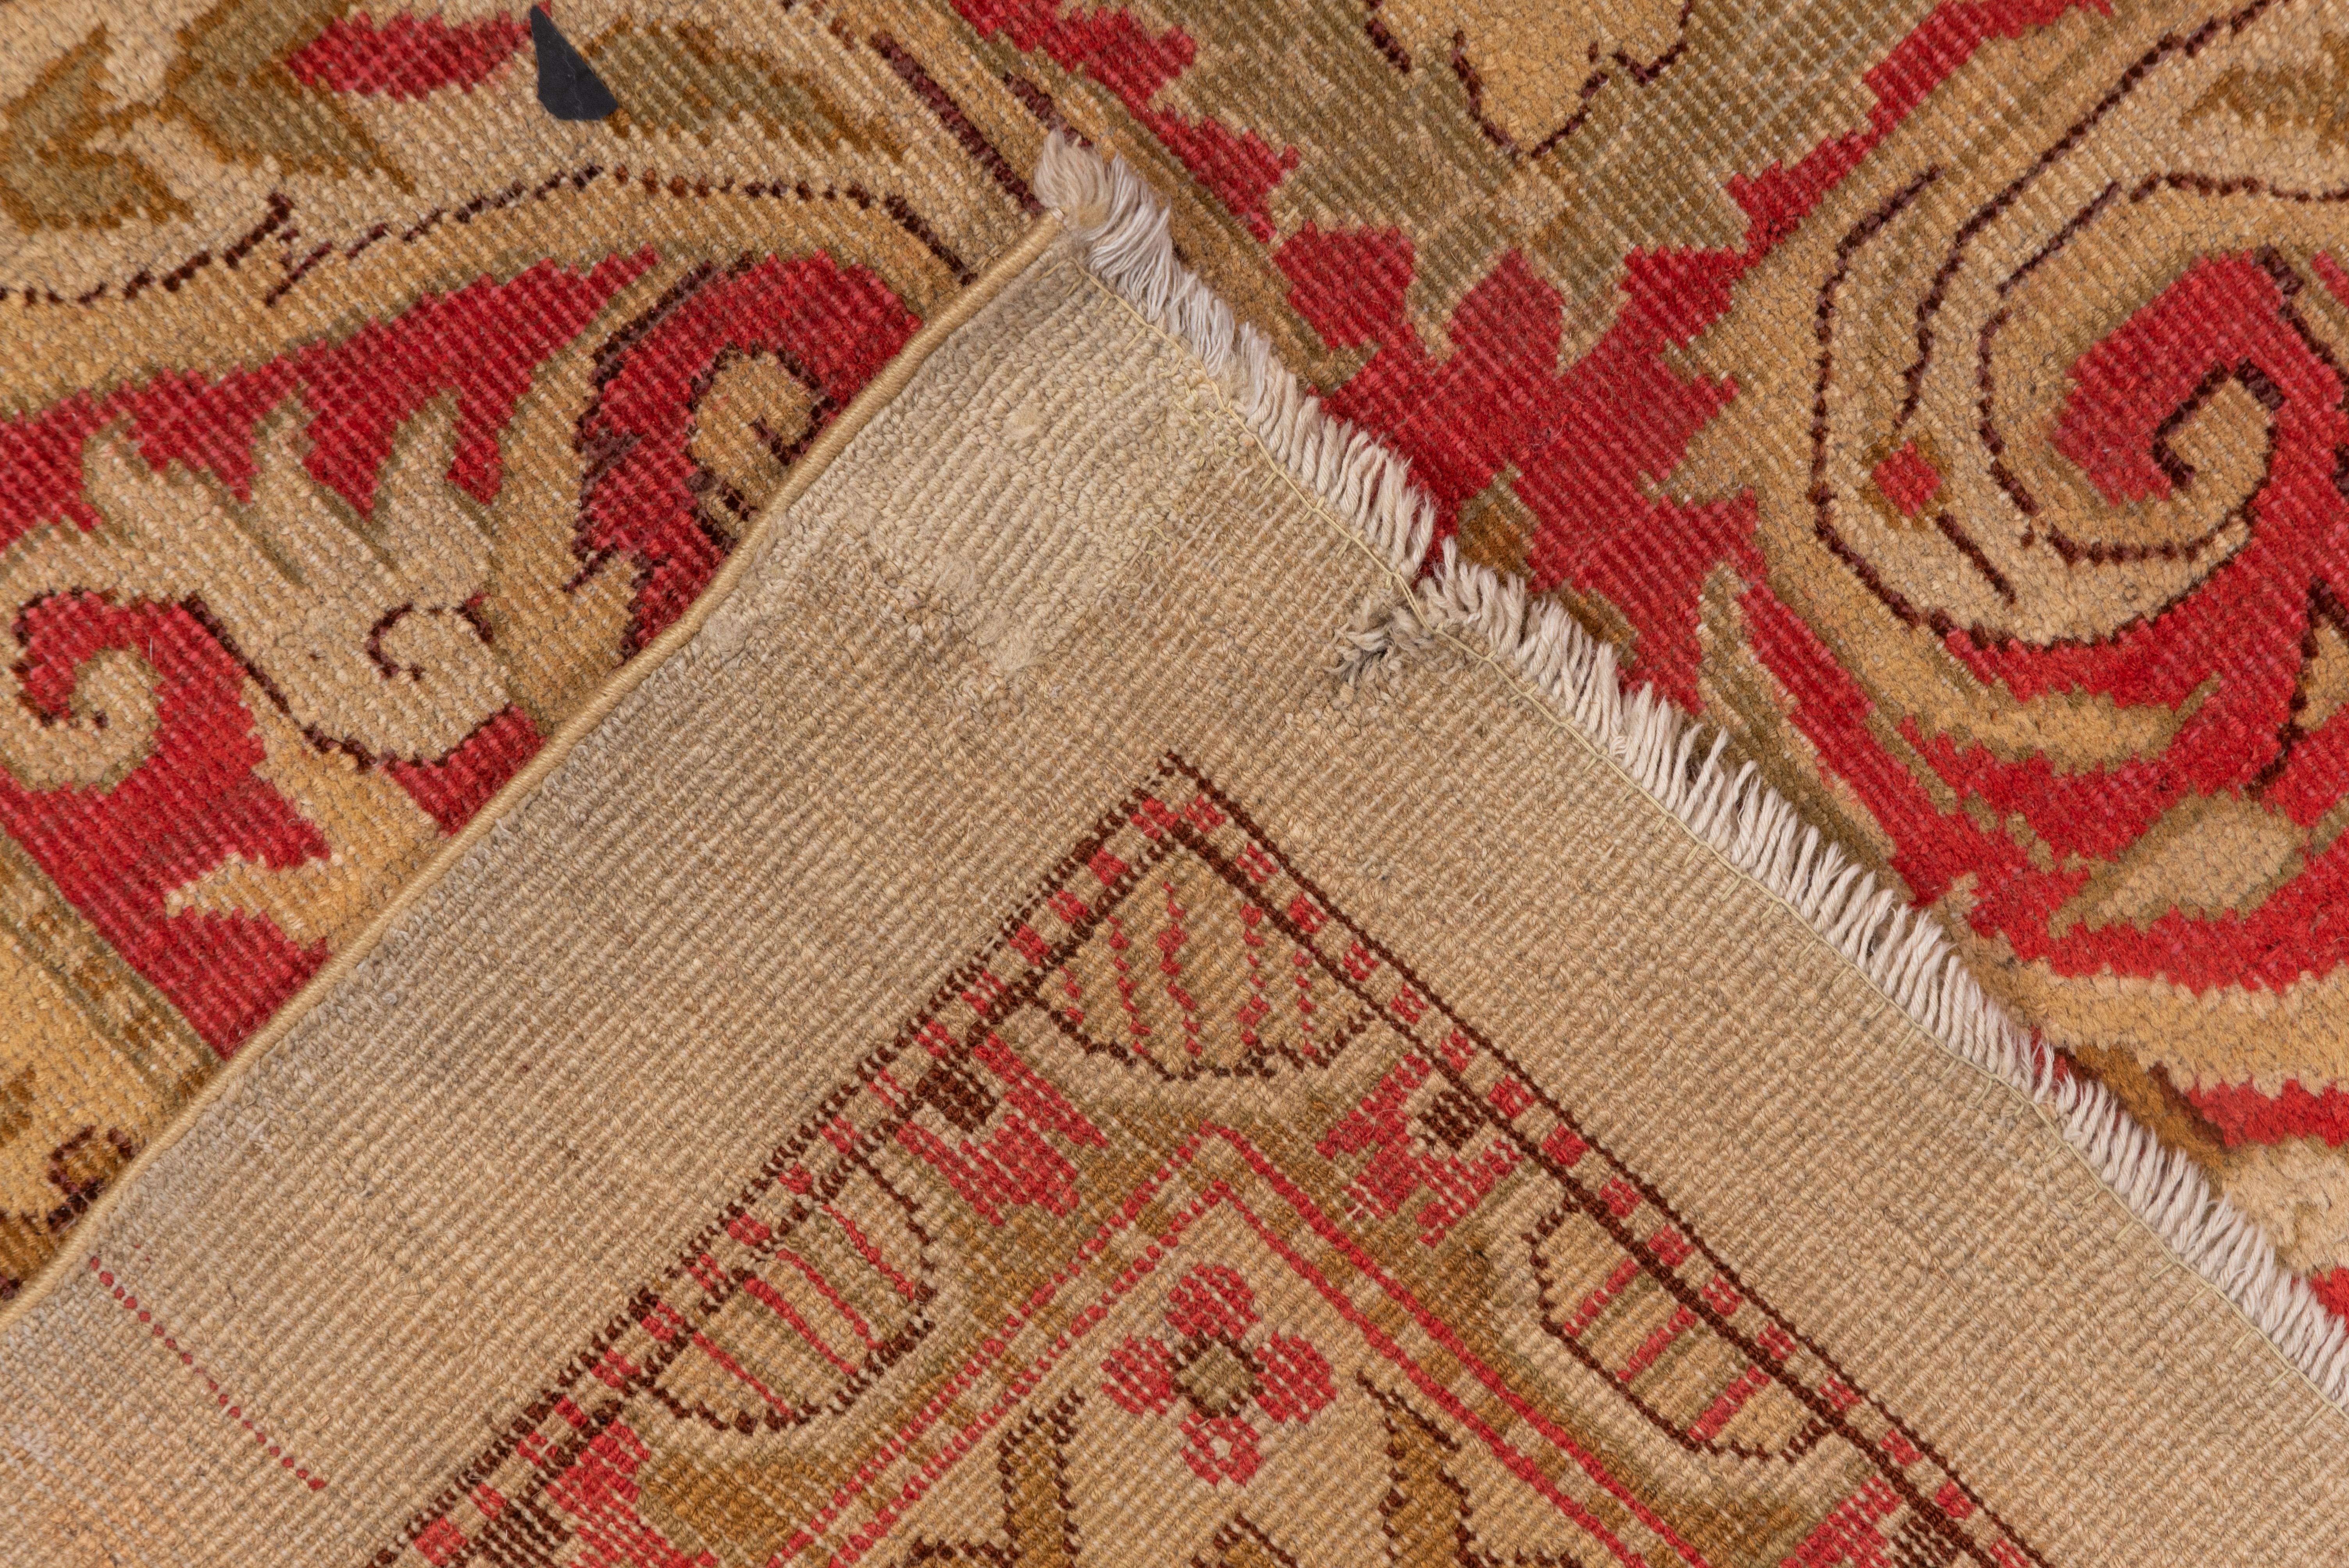 Hand-Woven Antique Indian Agra Carpet, Yellow and Red Tones, 1910s, Red Border For Sale